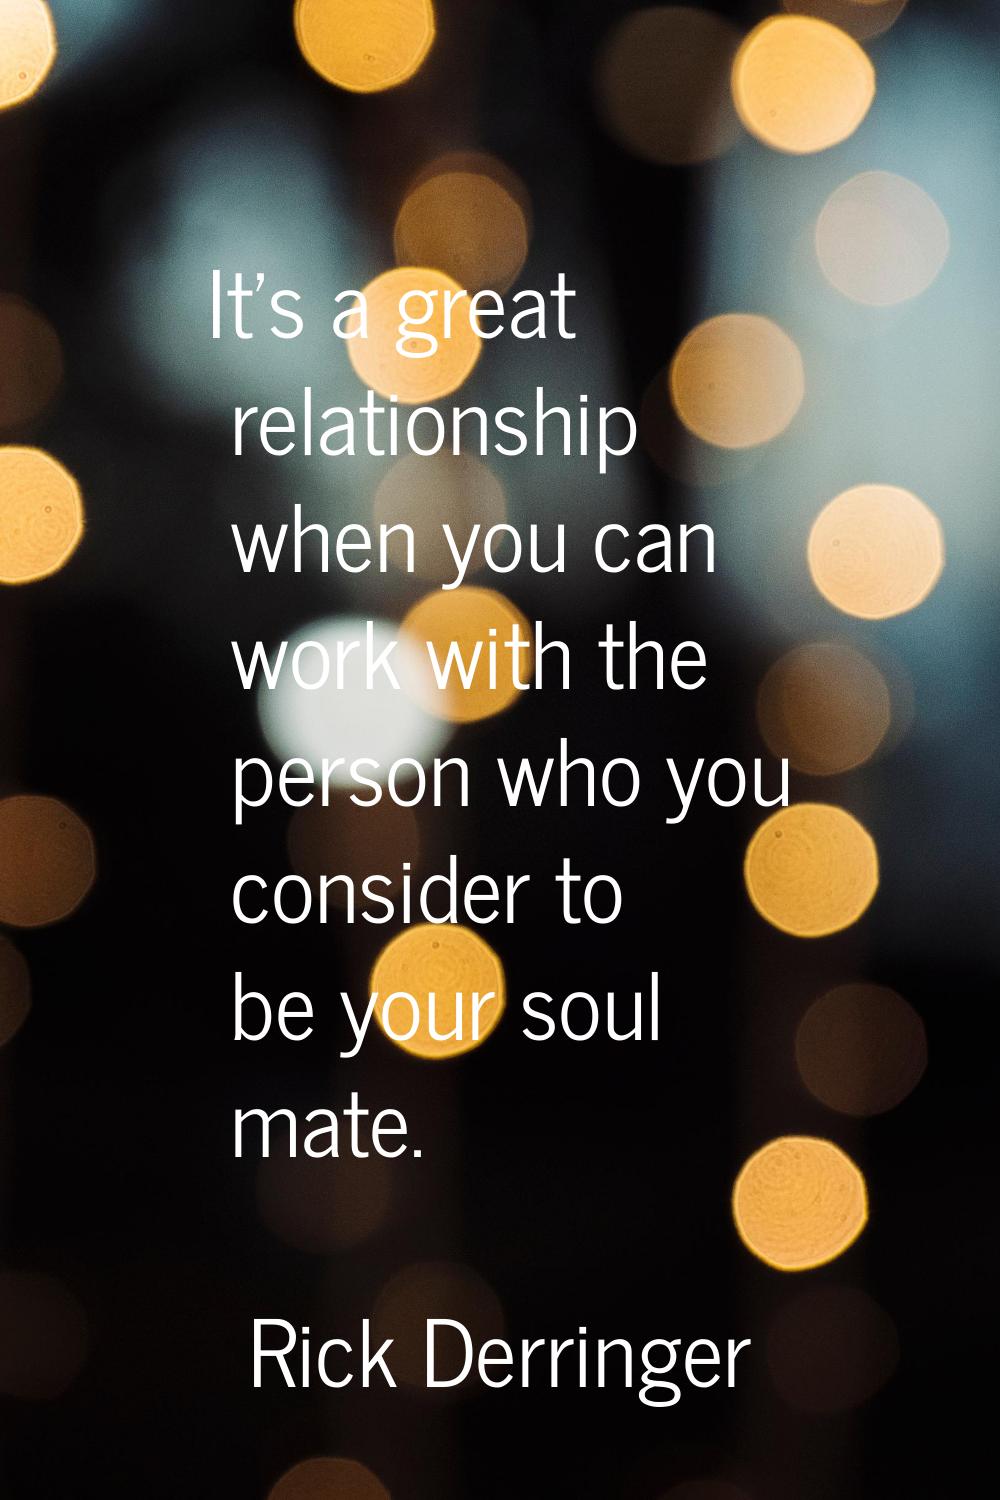 It's a great relationship when you can work with the person who you consider to be your soul mate.